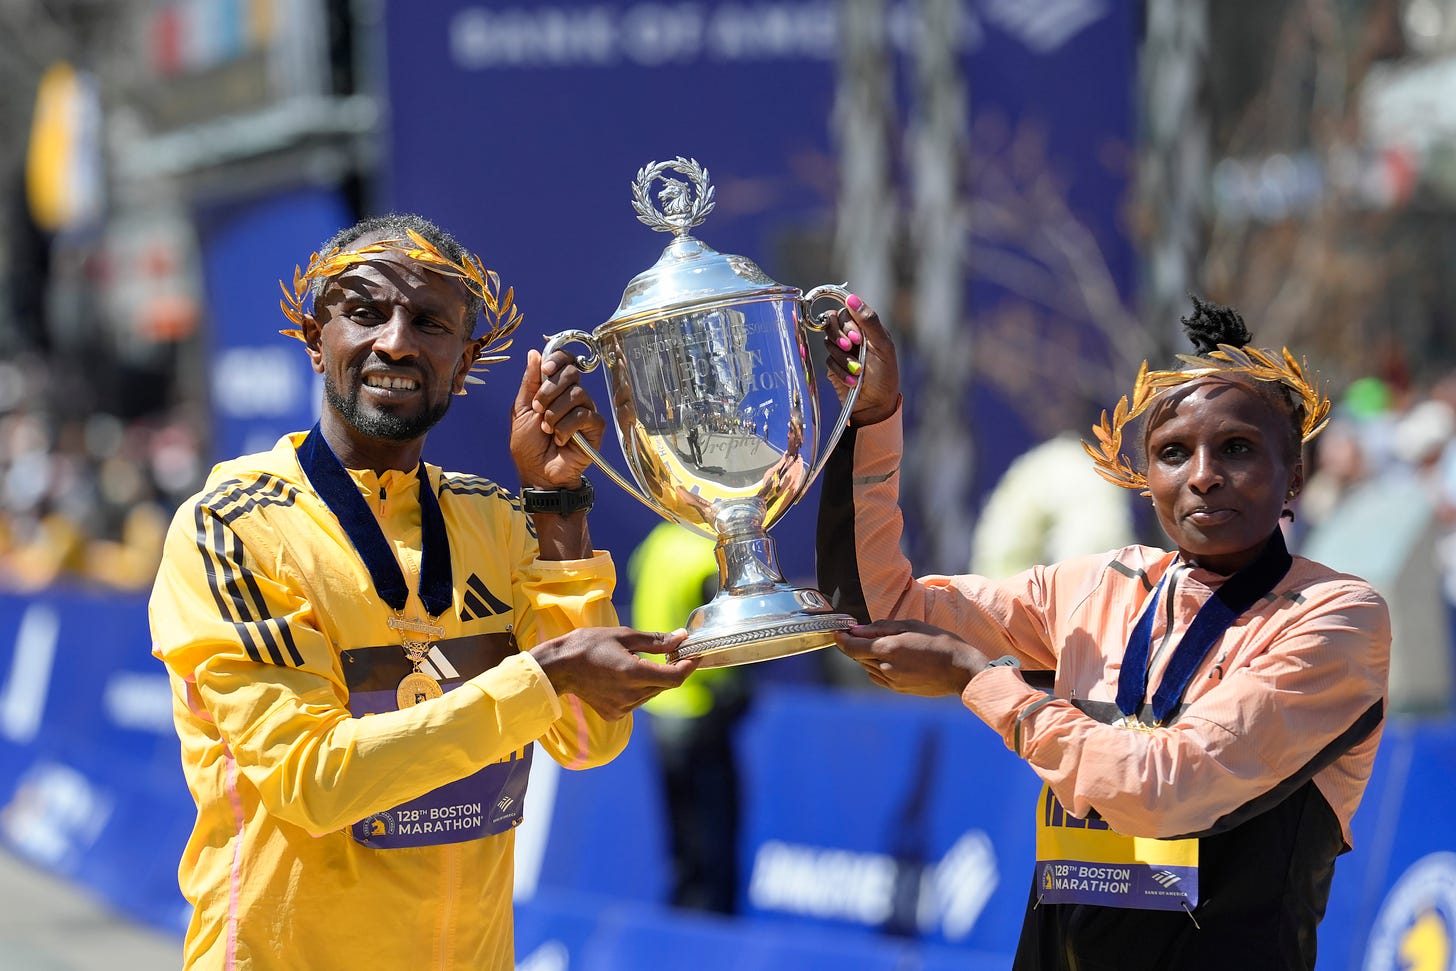 Sisay Lemma, of Ethiopia, left, winner of the men's division of the Boston Marathon, and Hellen Obiri, of Kenya, right, winner of the women's division of the race, hold the trophy on the finish line of the Boston Marathon.